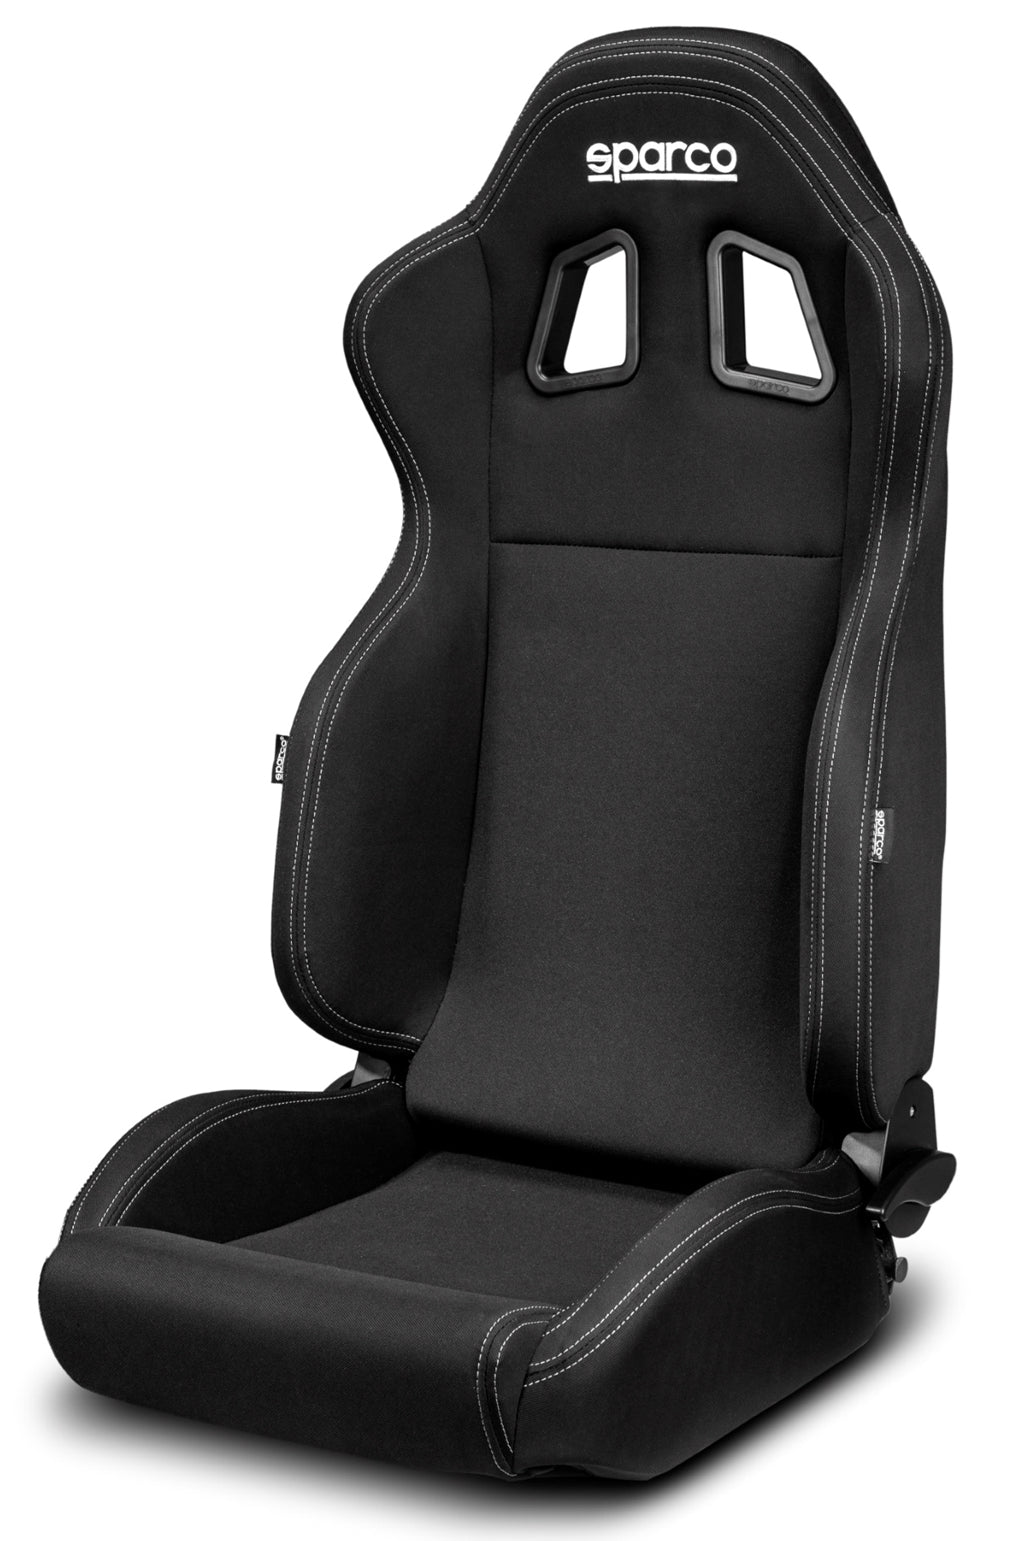 Sparco R100 Seat Black Front Image